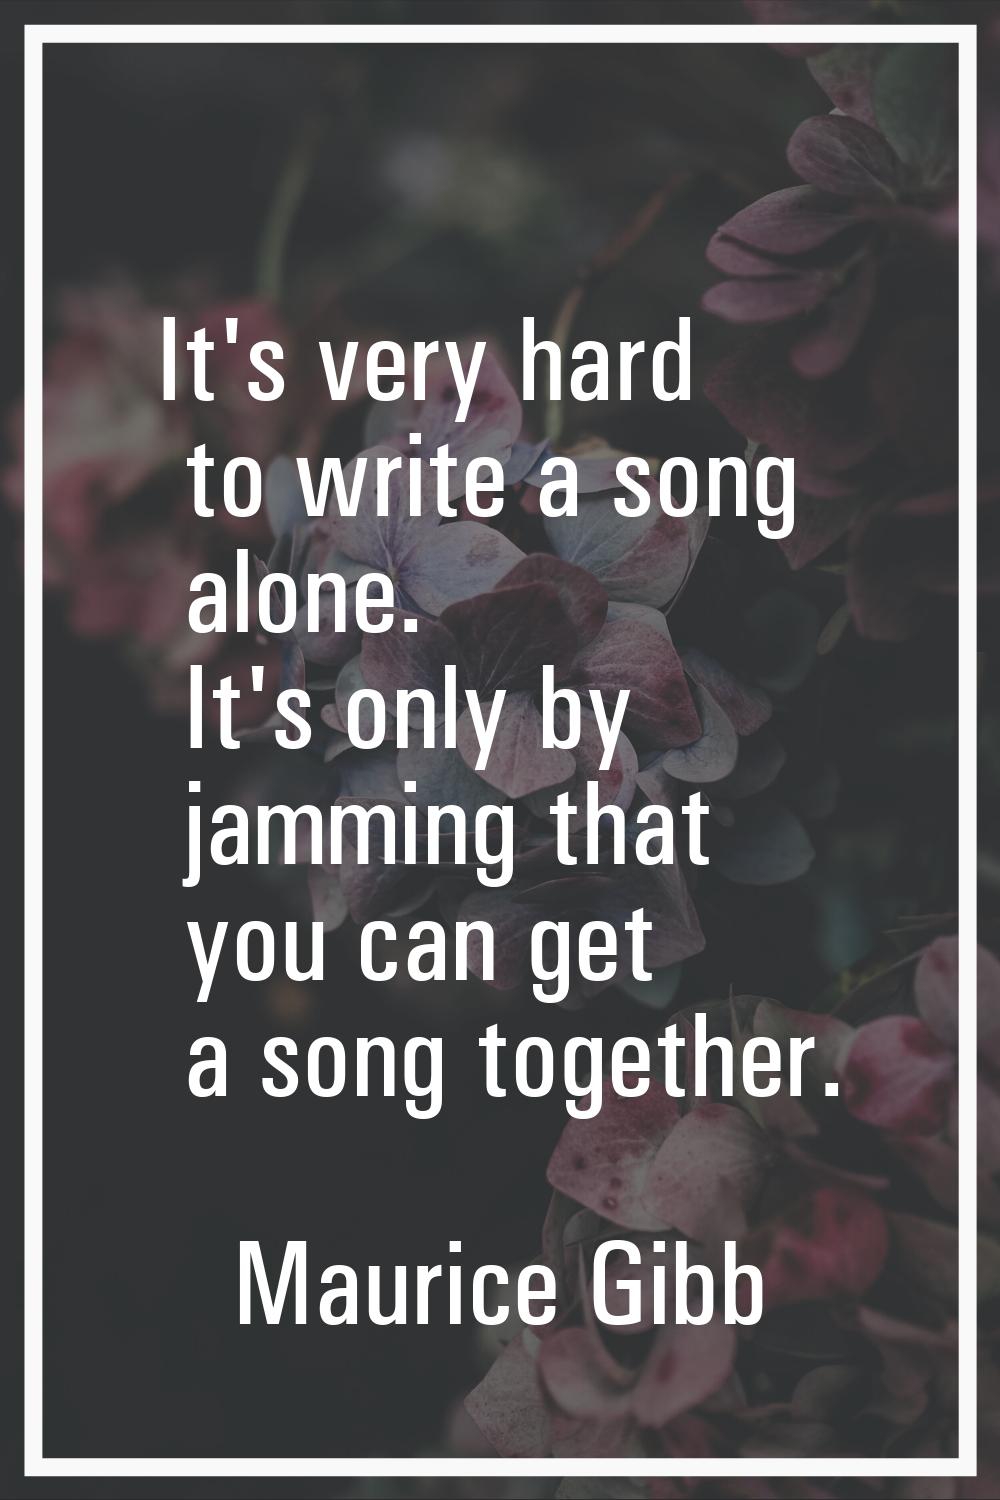 It's very hard to write a song alone. It's only by jamming that you can get a song together.